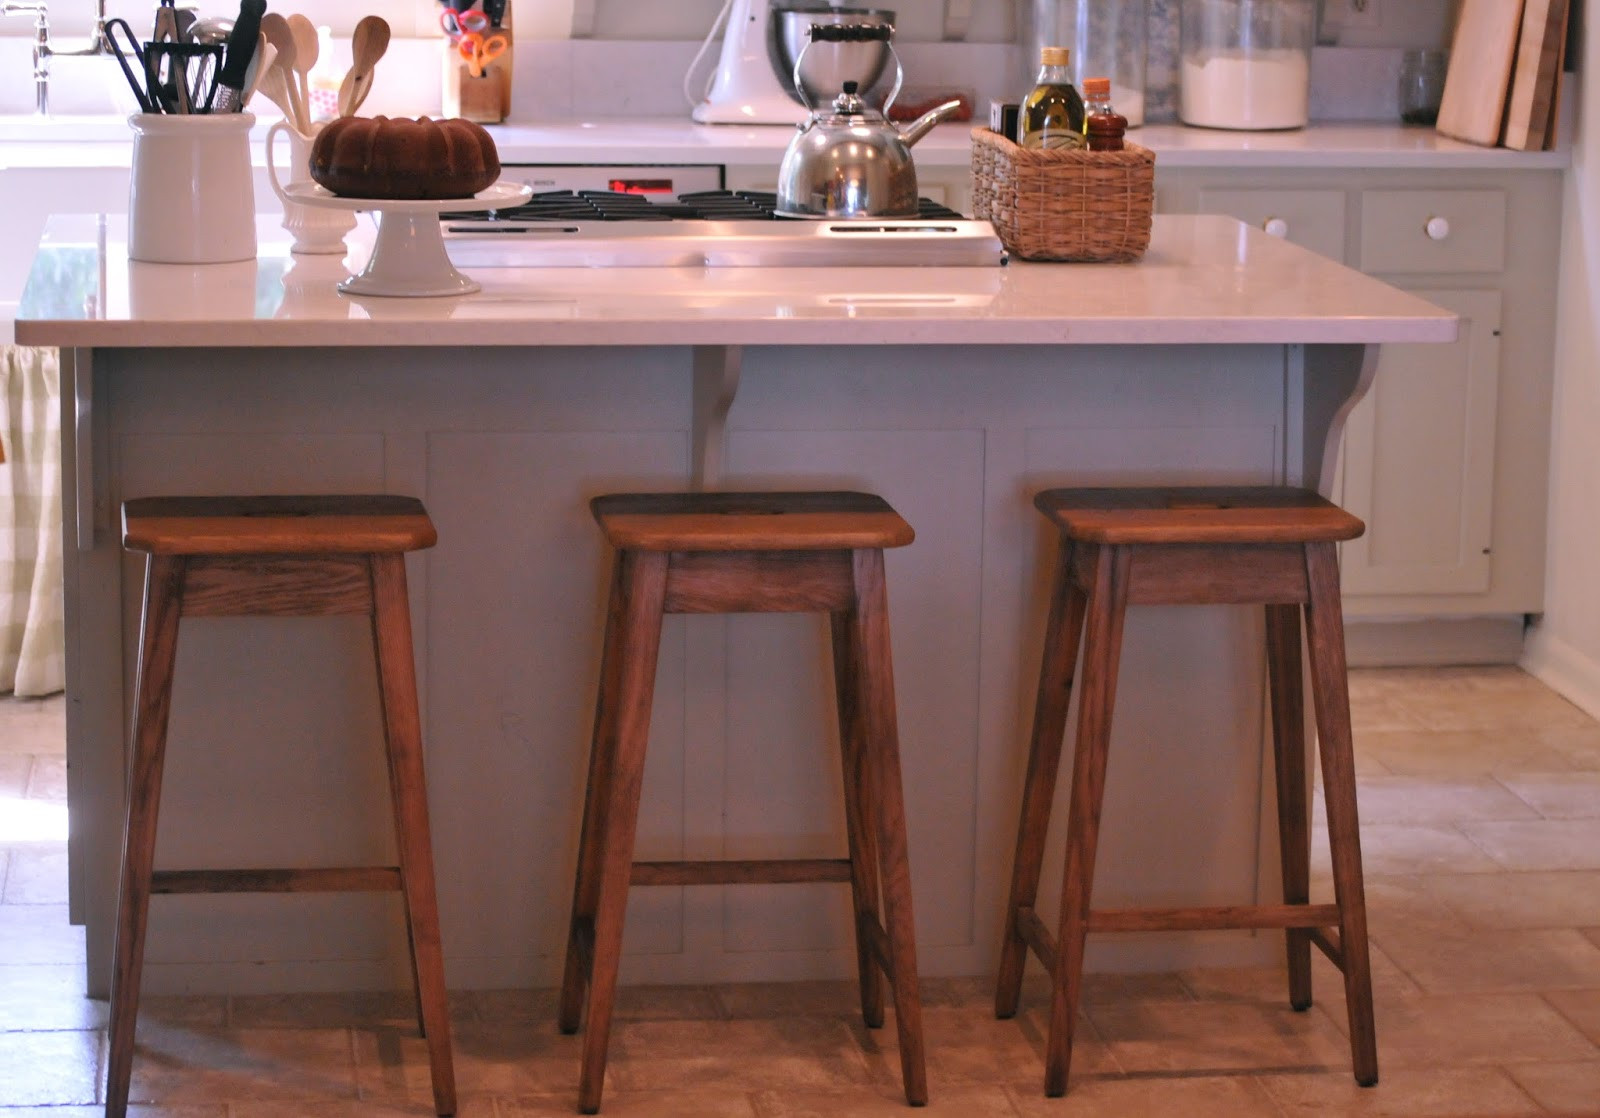 Kitchen Counter Bar Stools
 NINE SIXTEEN Our Home